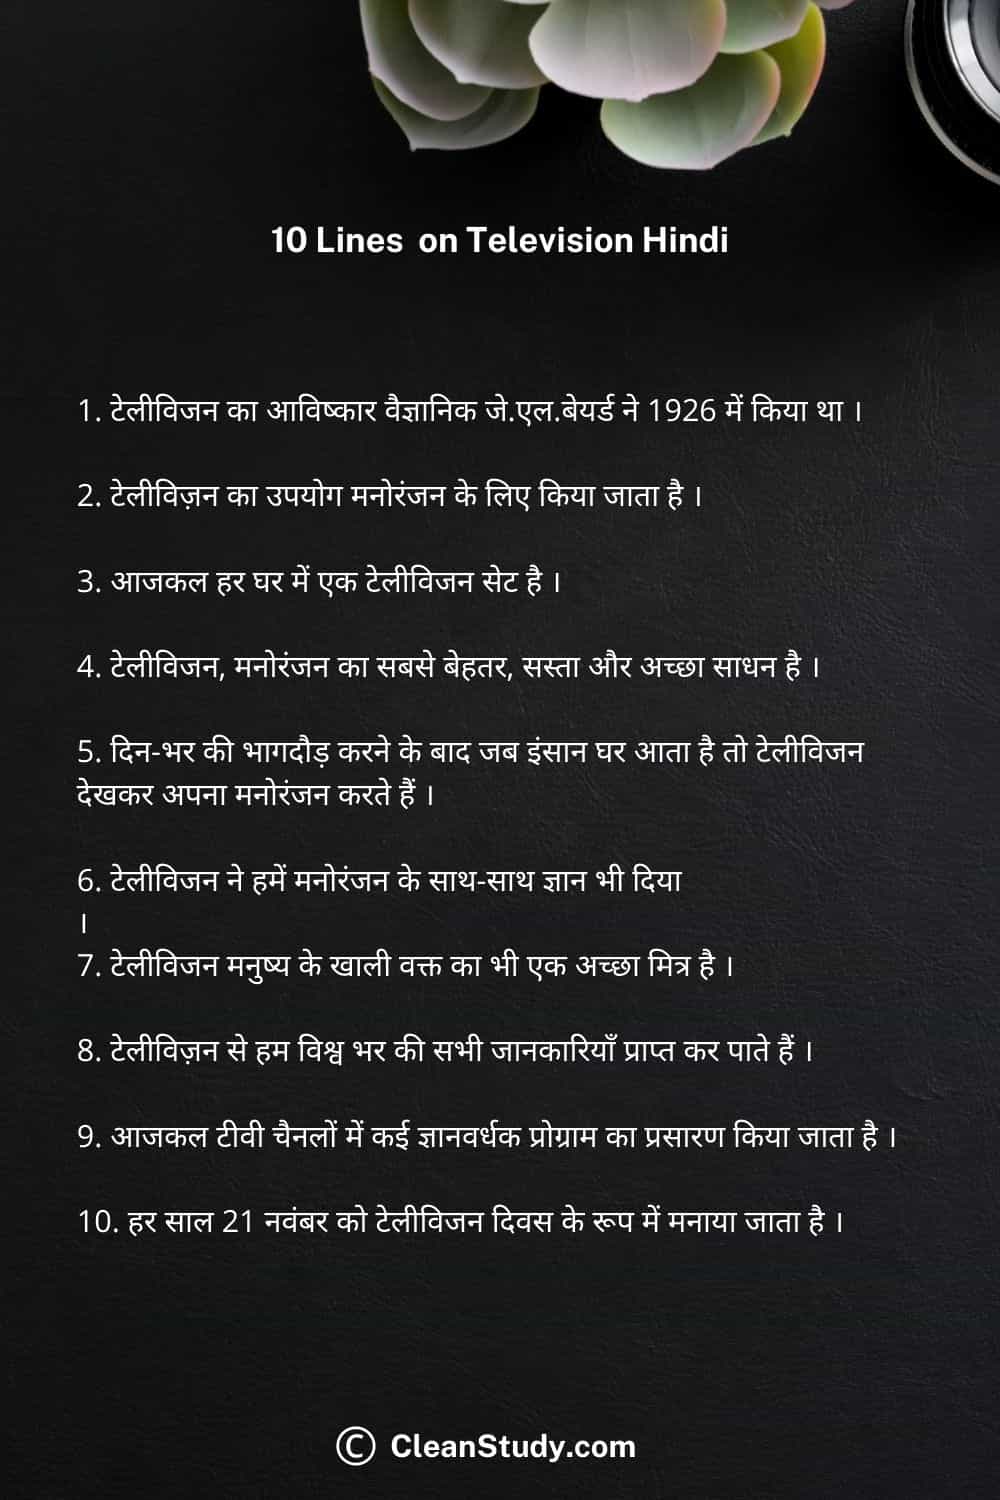 10 Lines on television in hindi